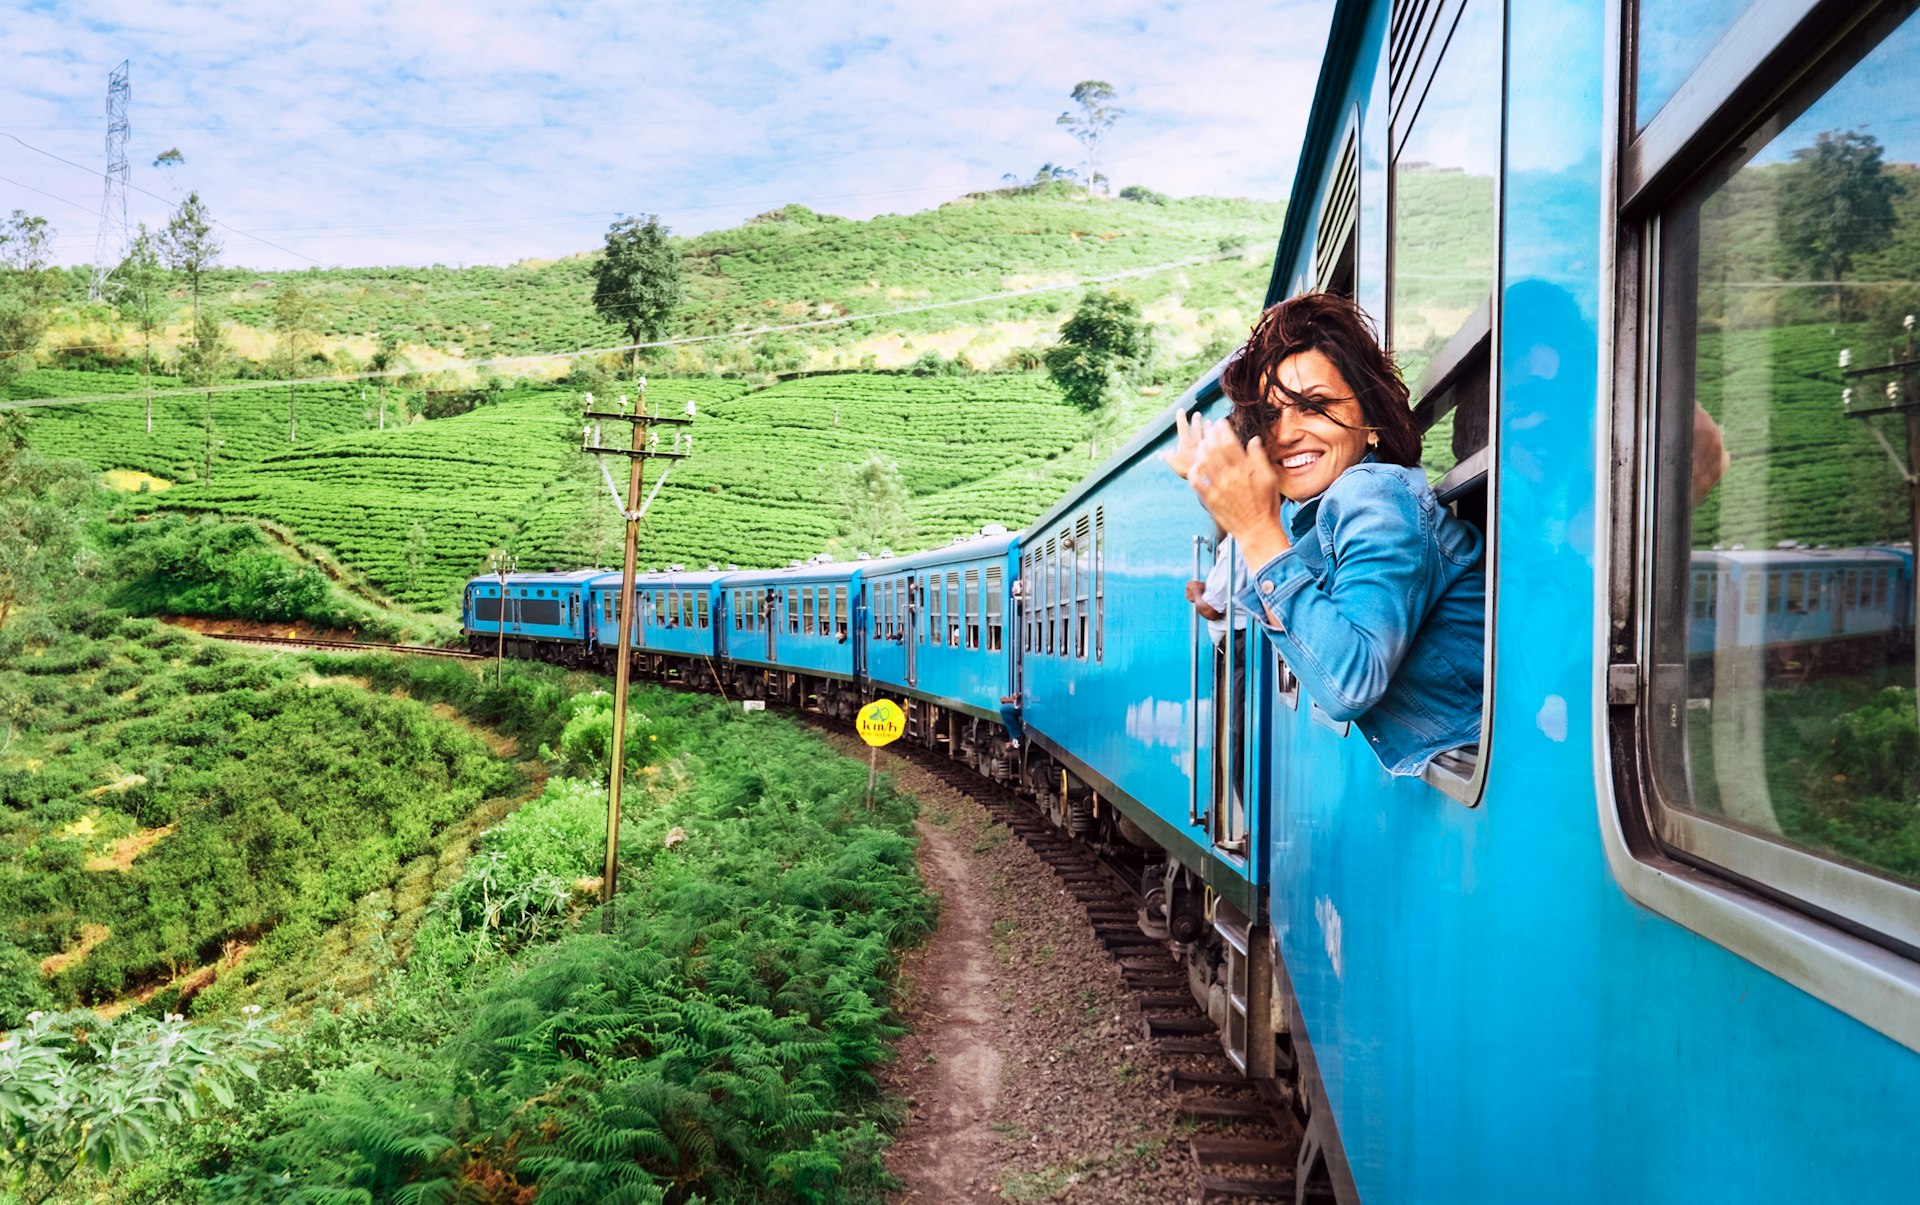 A smiling woman looks out from a train window as it travel on a picturesque railroad in Sri Lanka